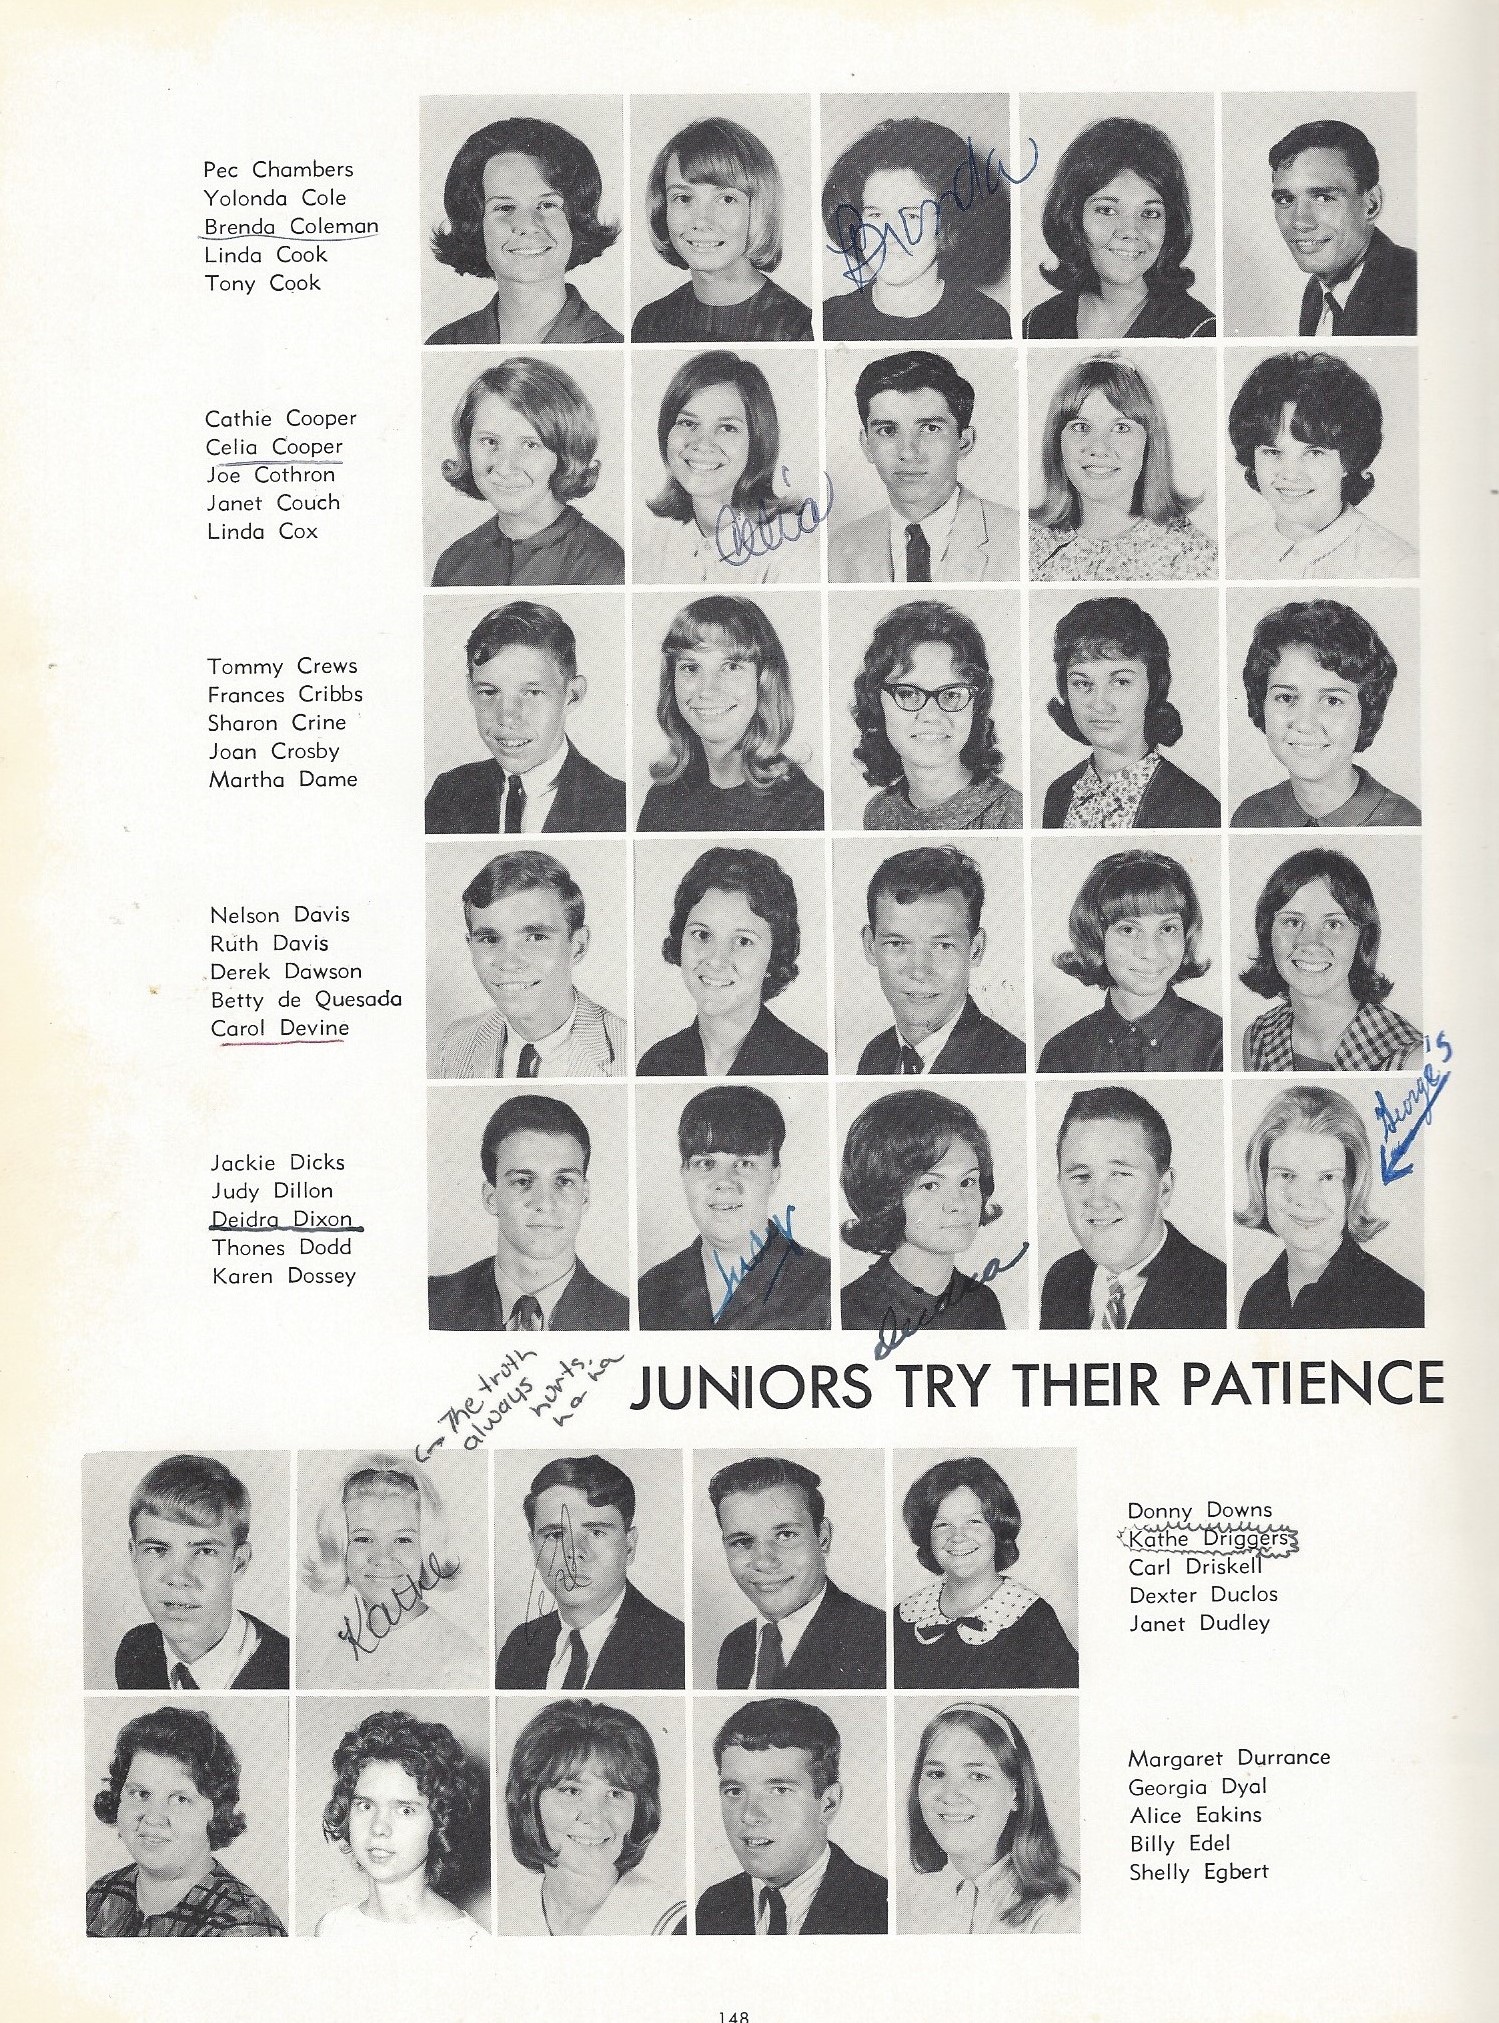 JUNIORS (IN 1966) (click on picture to zoom) 